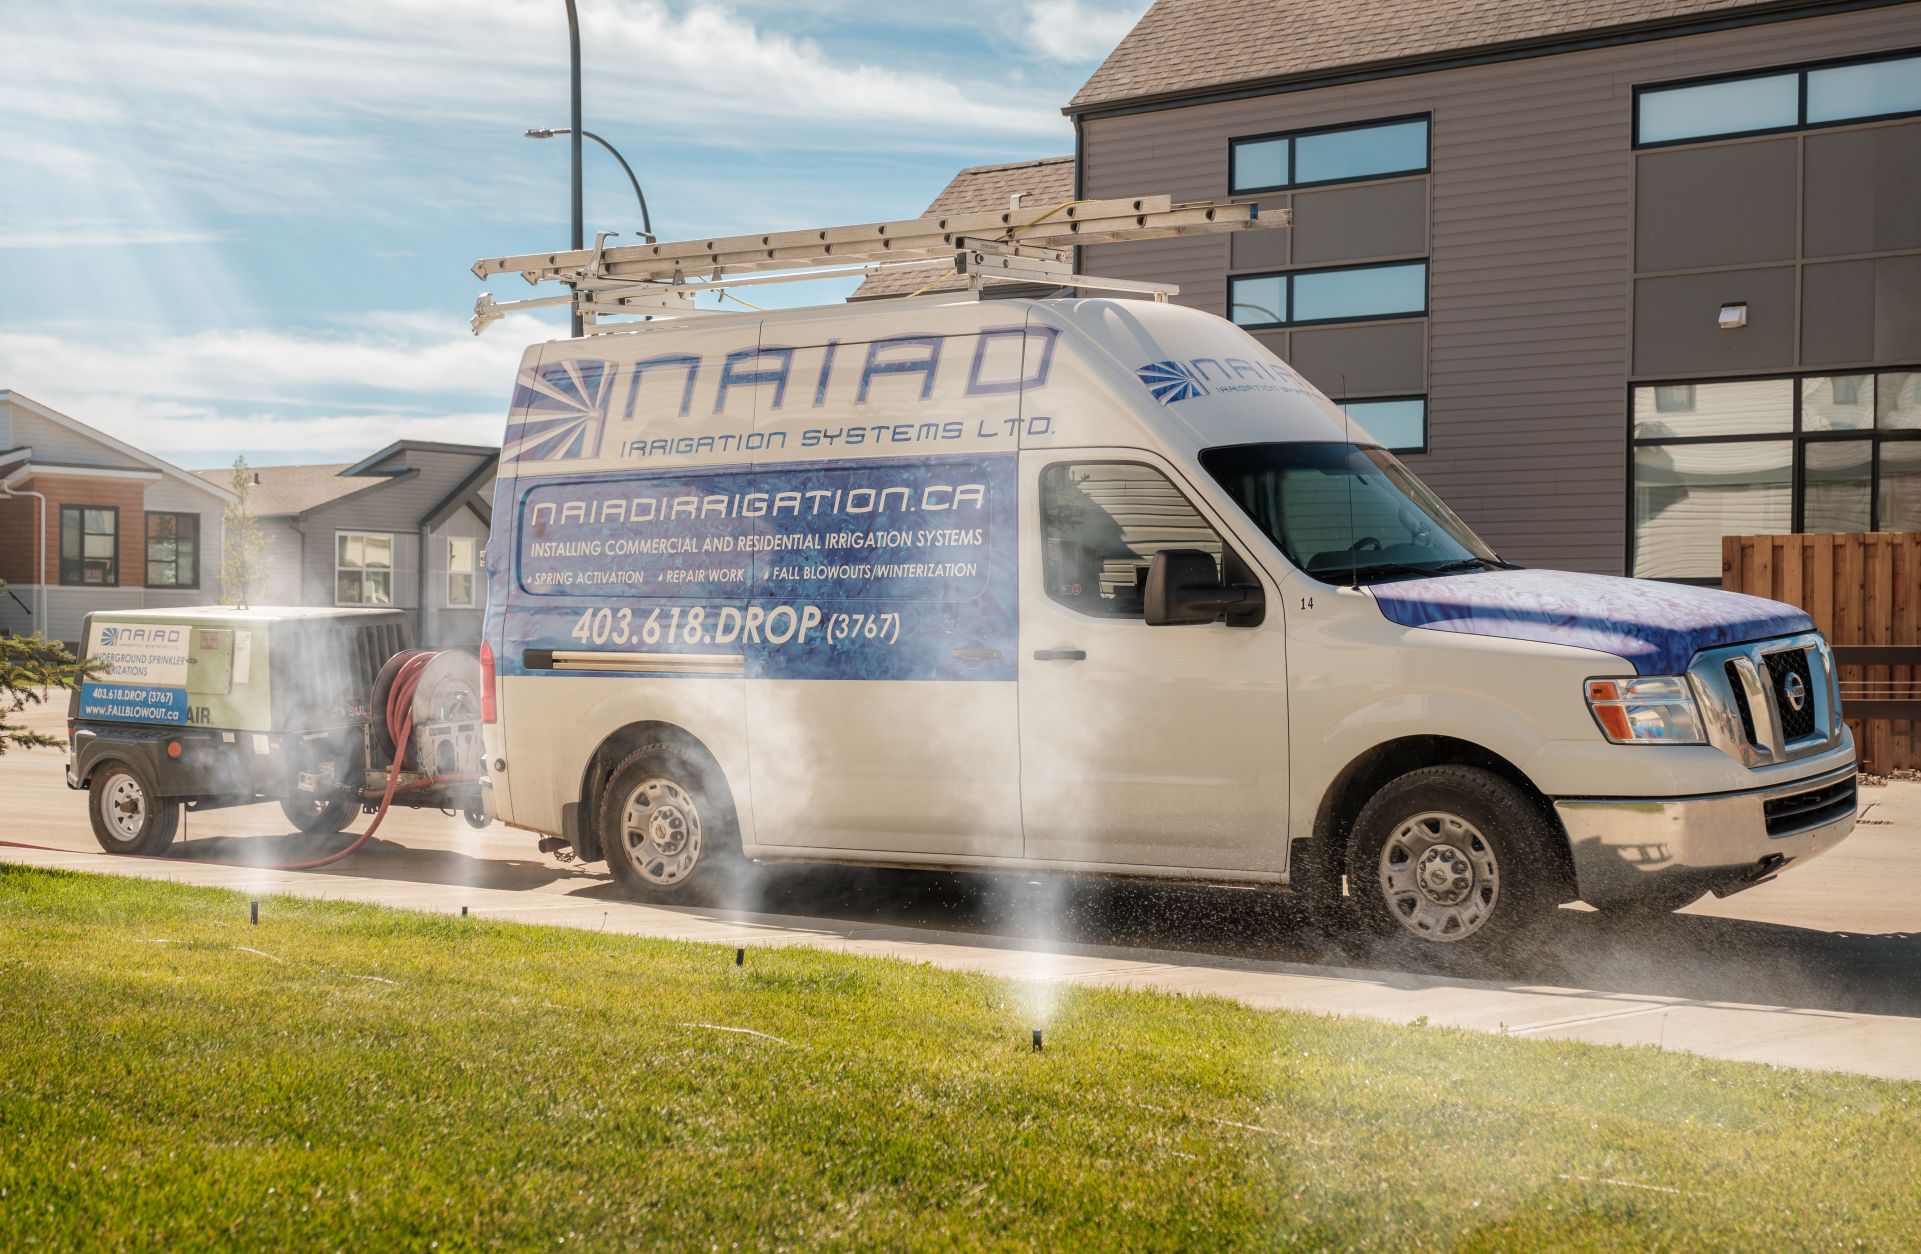 Water is expelled from a sprinkler system for winterization. A Naiad service van stands by to haul the air compressor in the background.